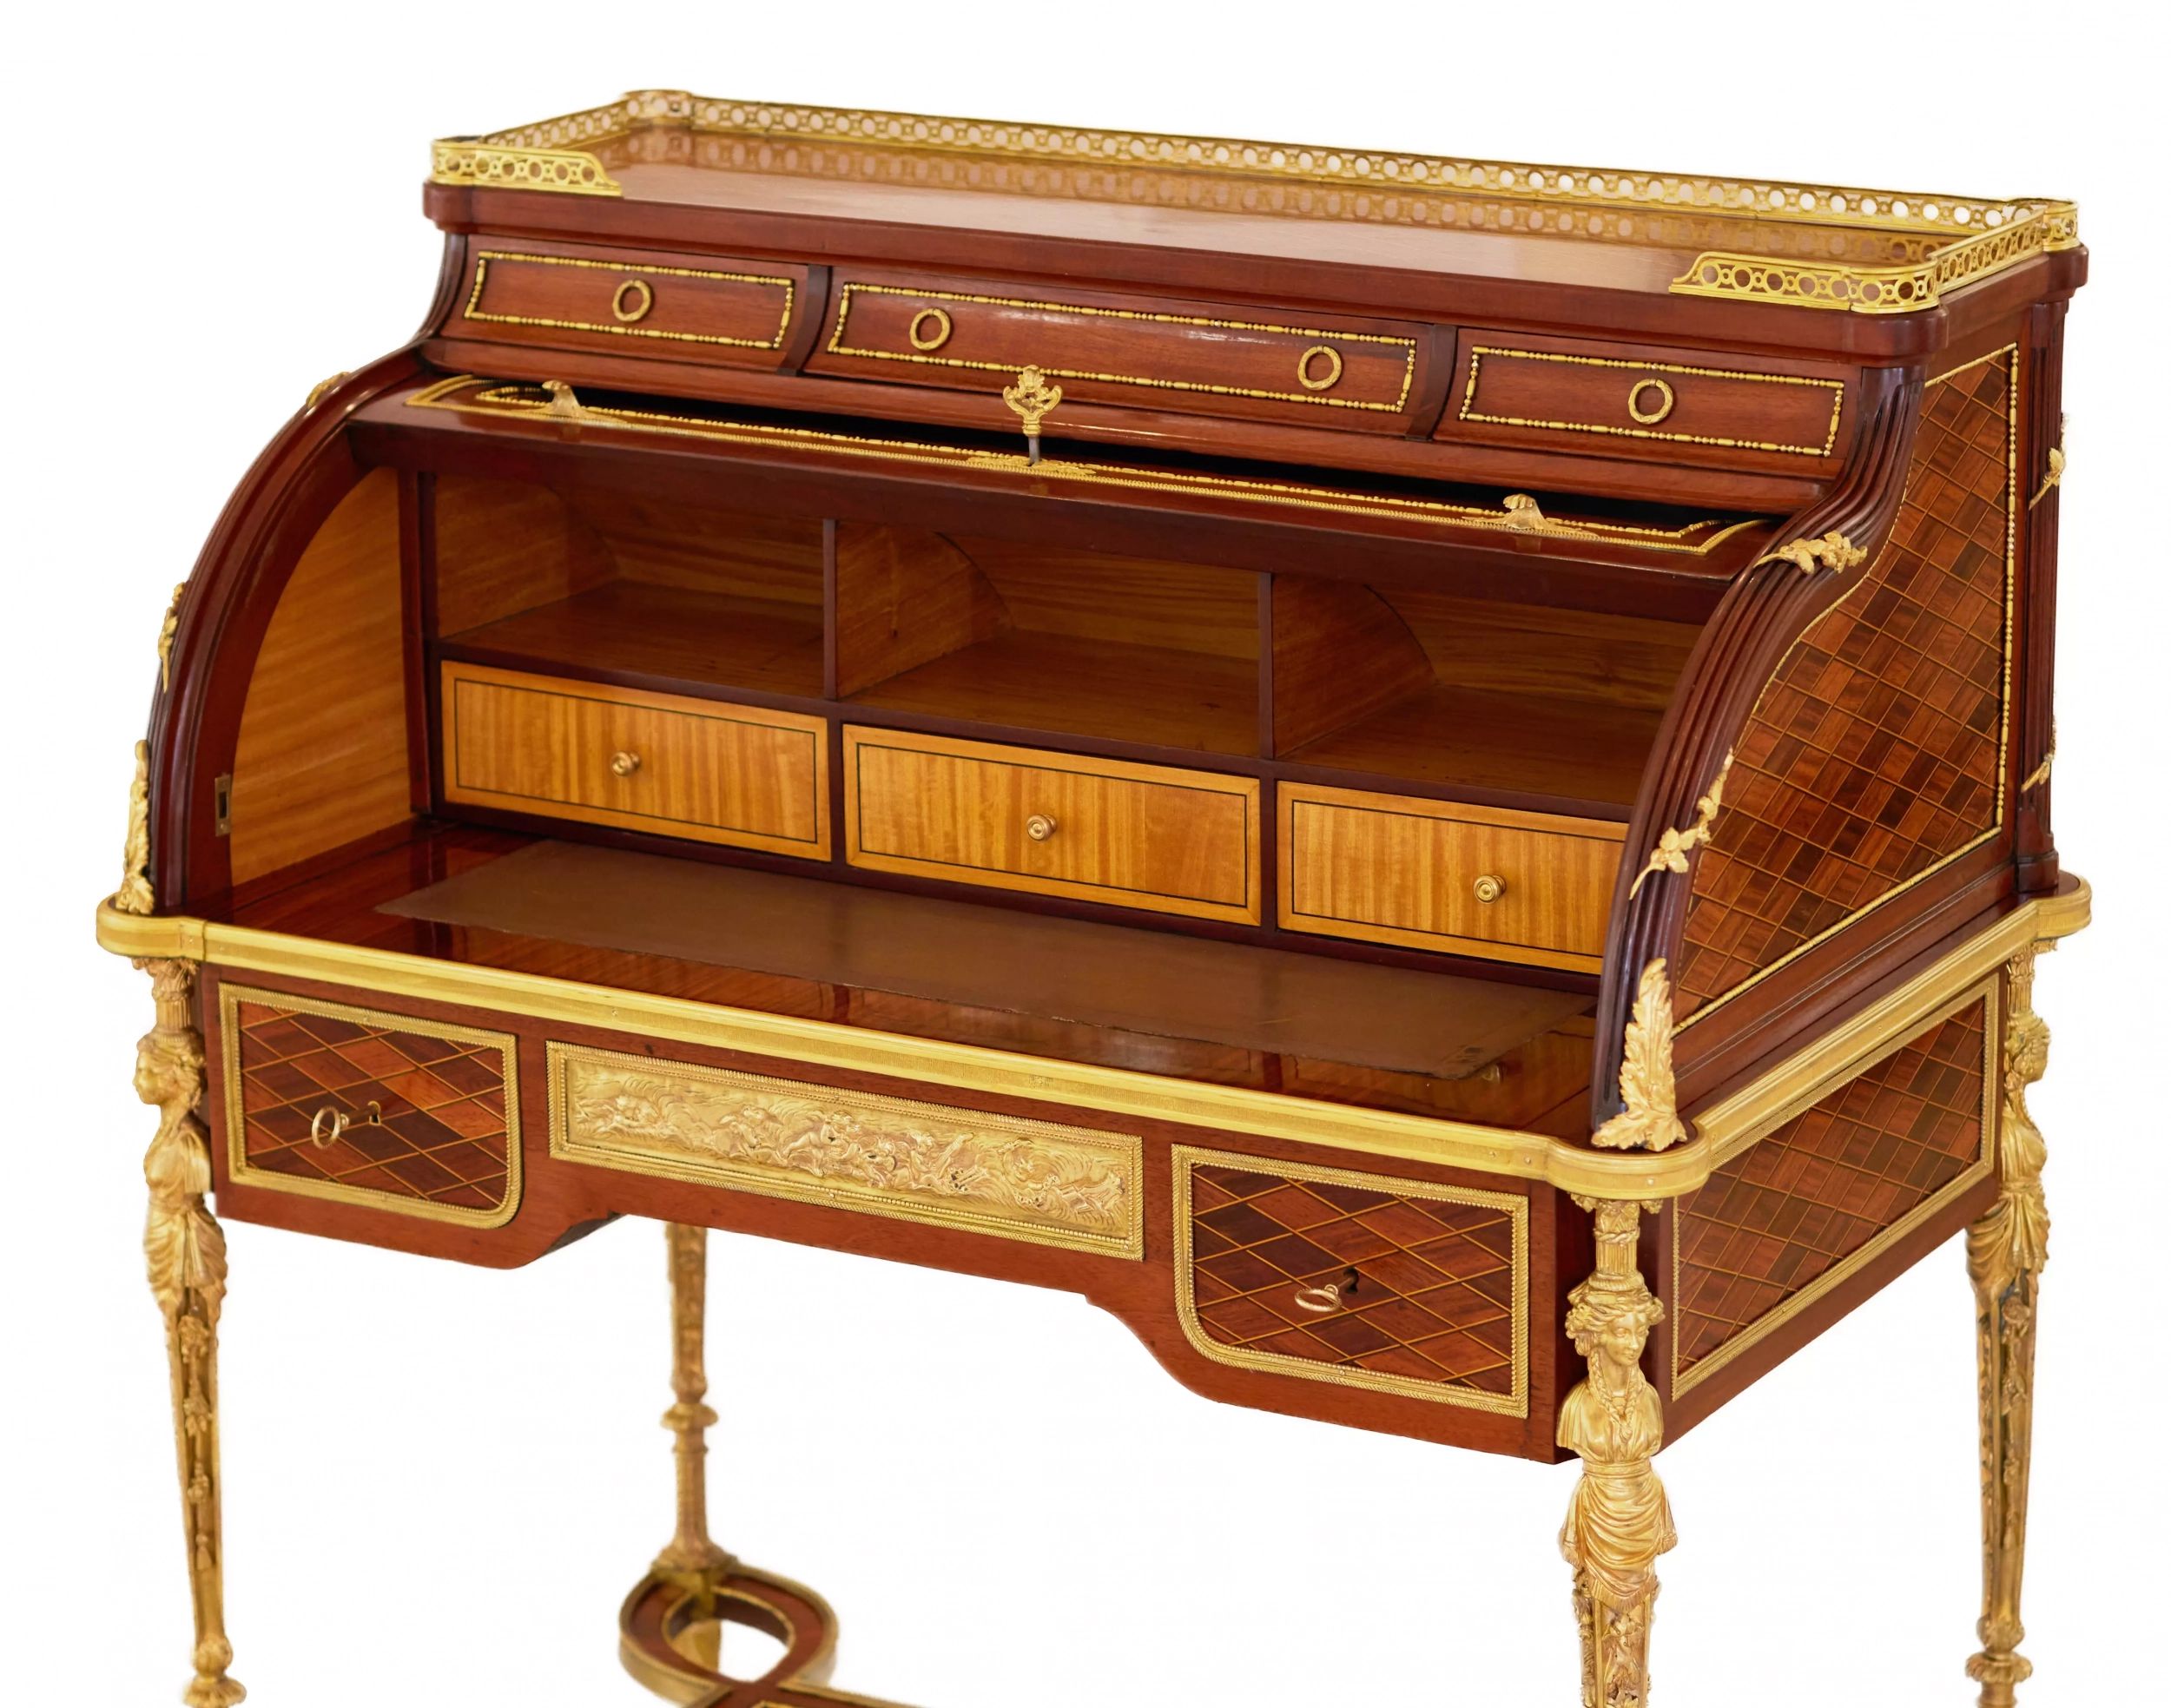 E.KAHN. A magnificent cylindrical bureau in mahogany and satin wood with gilt bronze. - Image 5 of 14